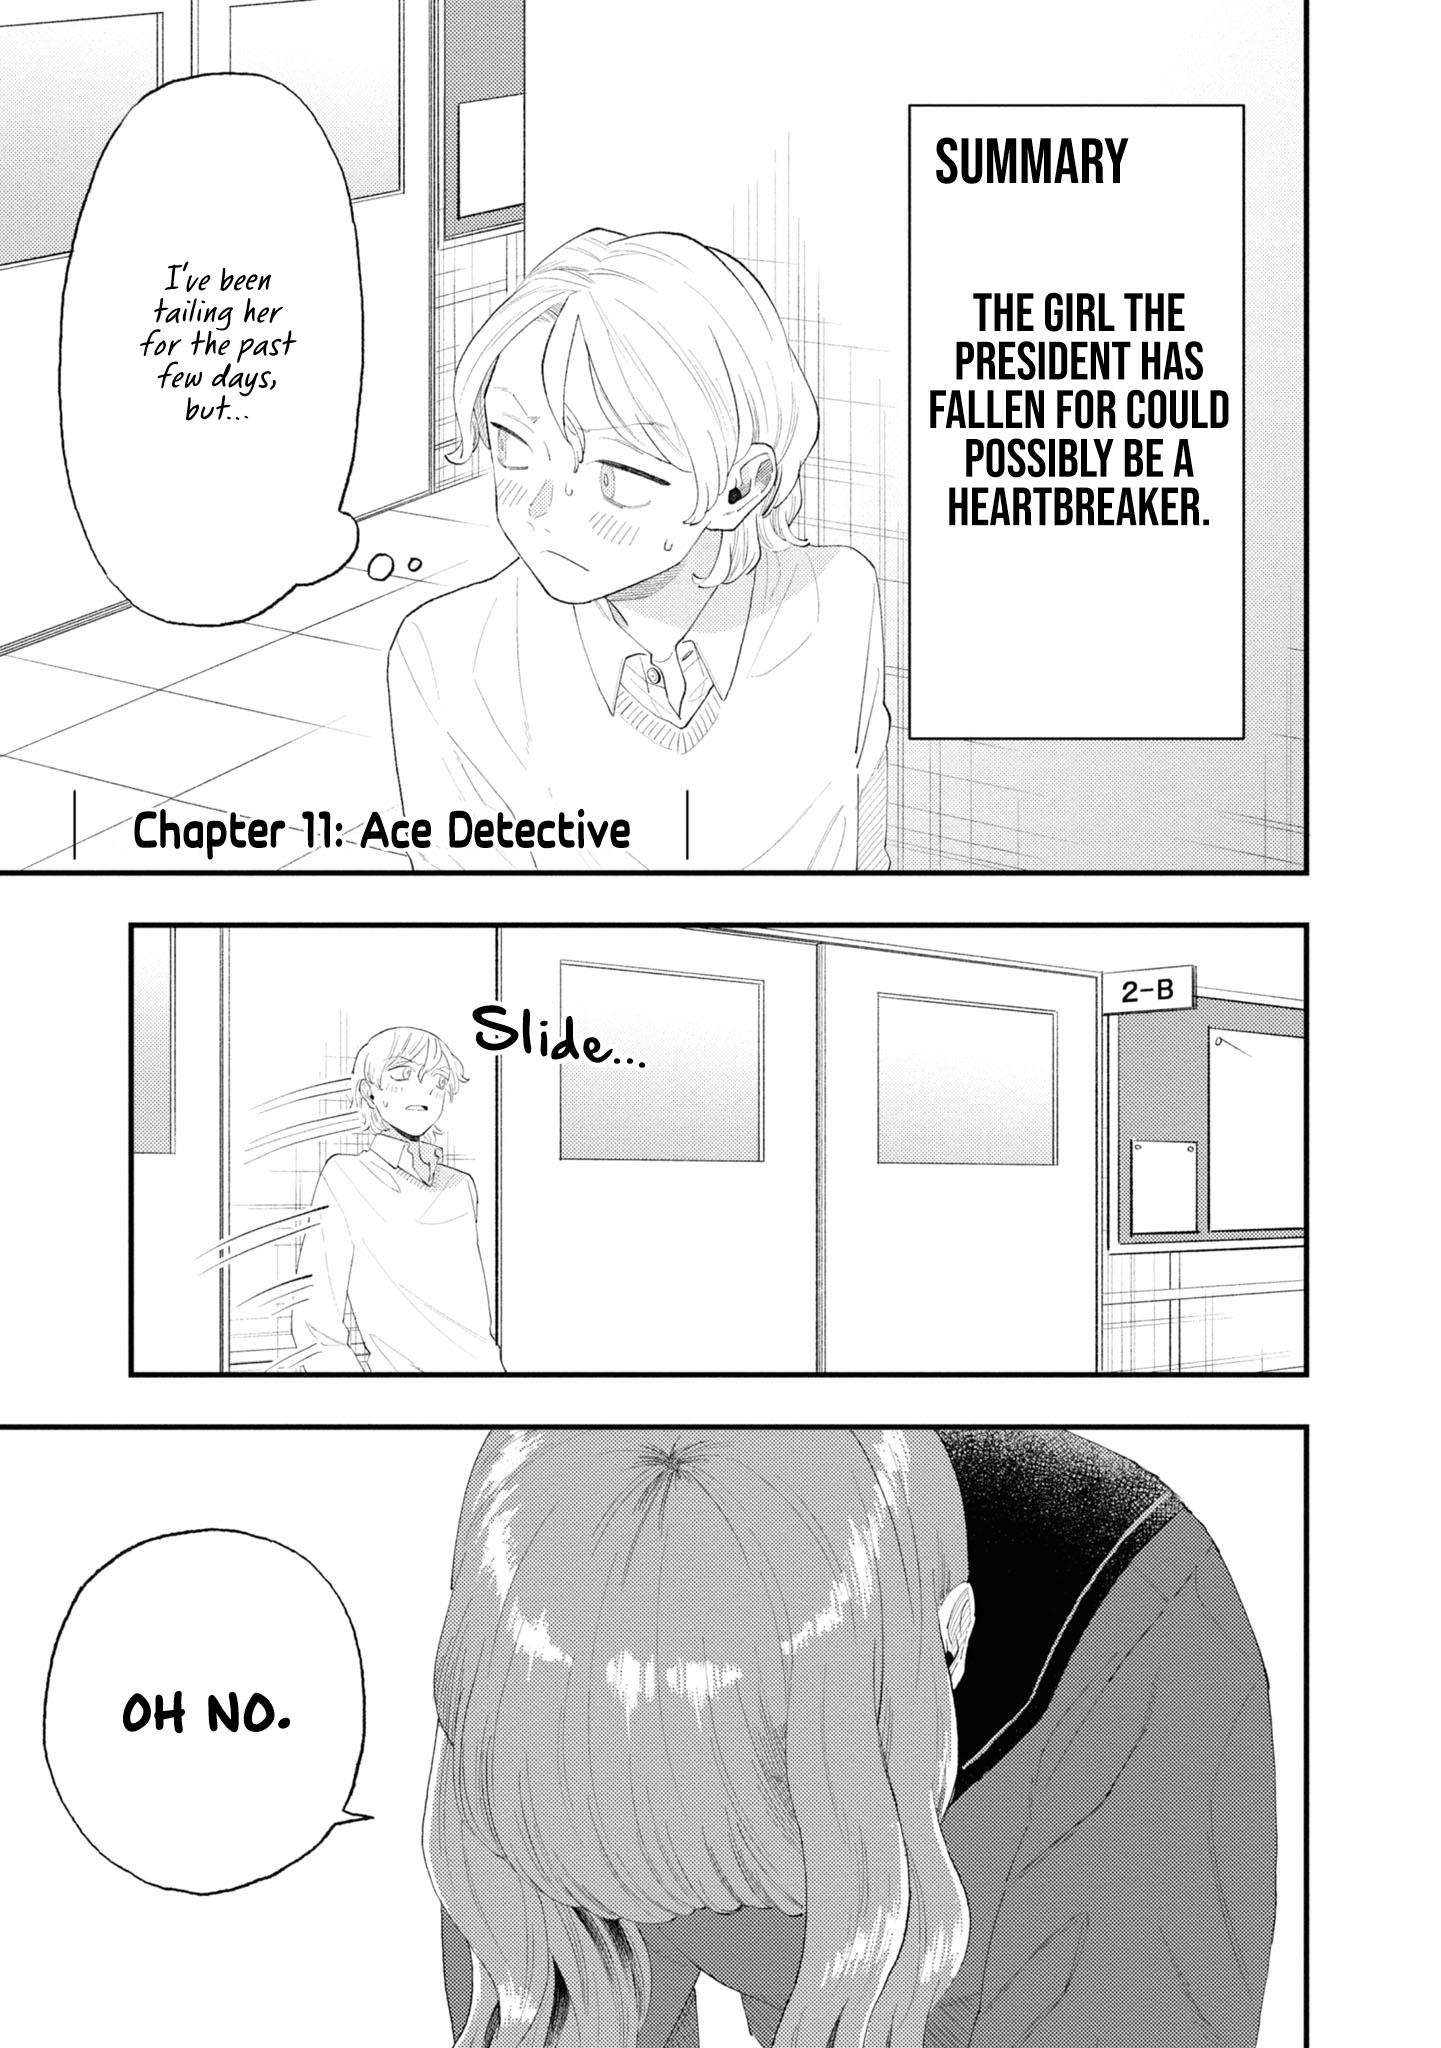 The Overly Straightforward Natsume-Kun Can't Properly Confess - Page 1